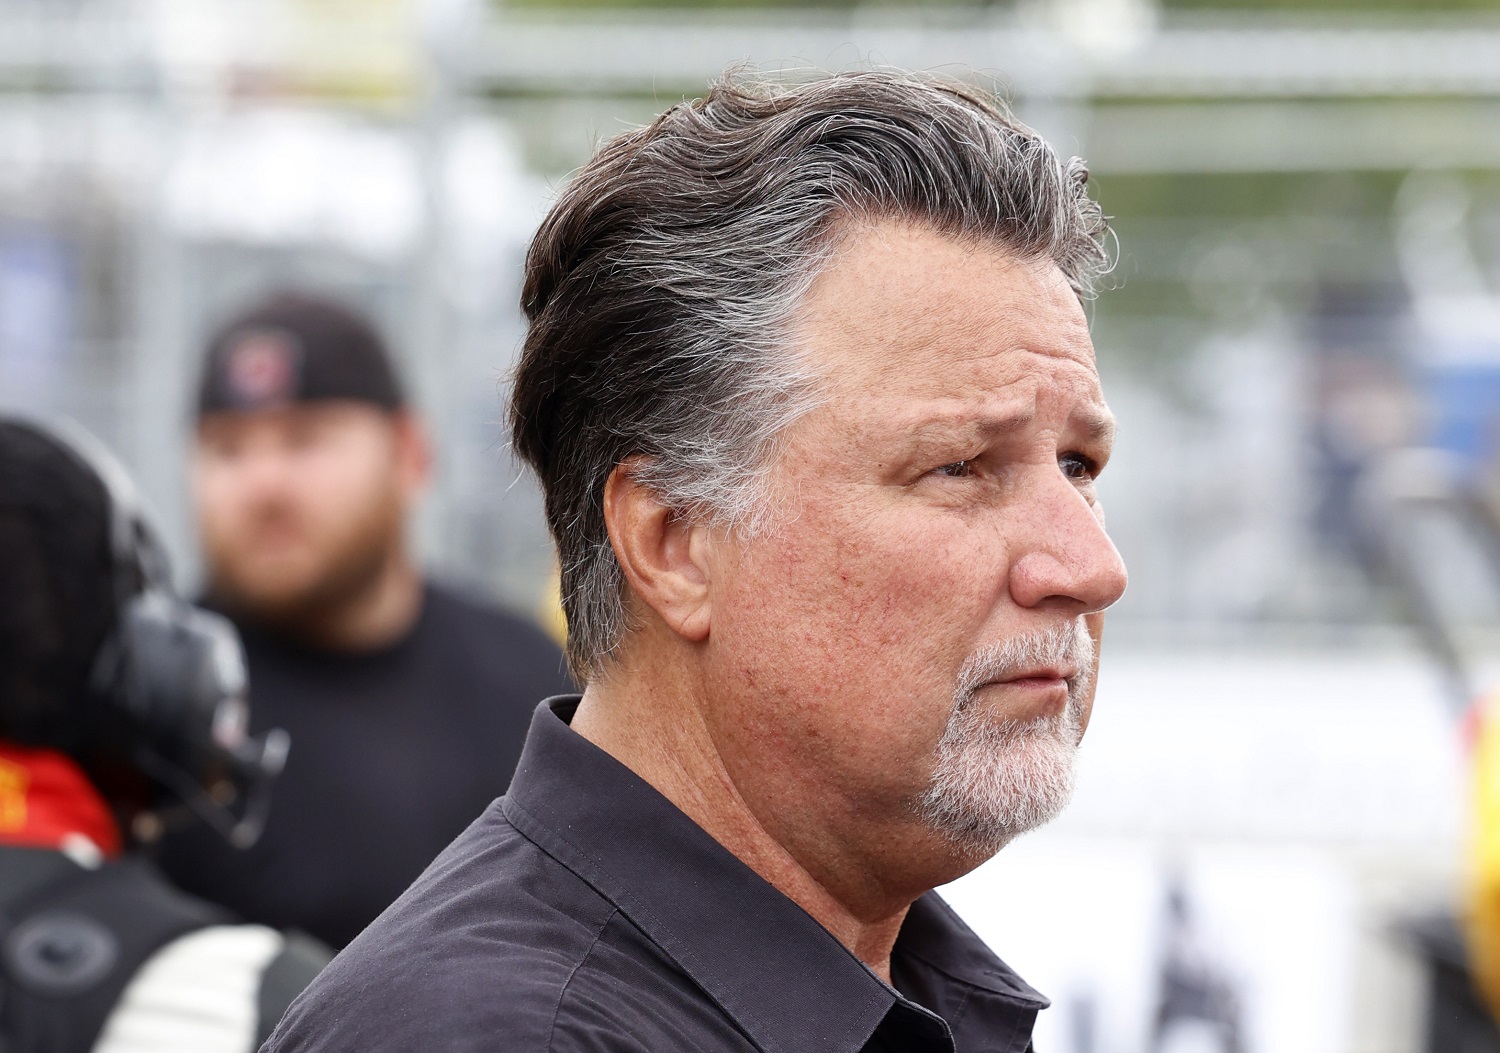 IndyCar series car owner Michael Andretti waits in the pits for the start of the Big Machine Music City Grand Prix on Aug. 7, 2022.